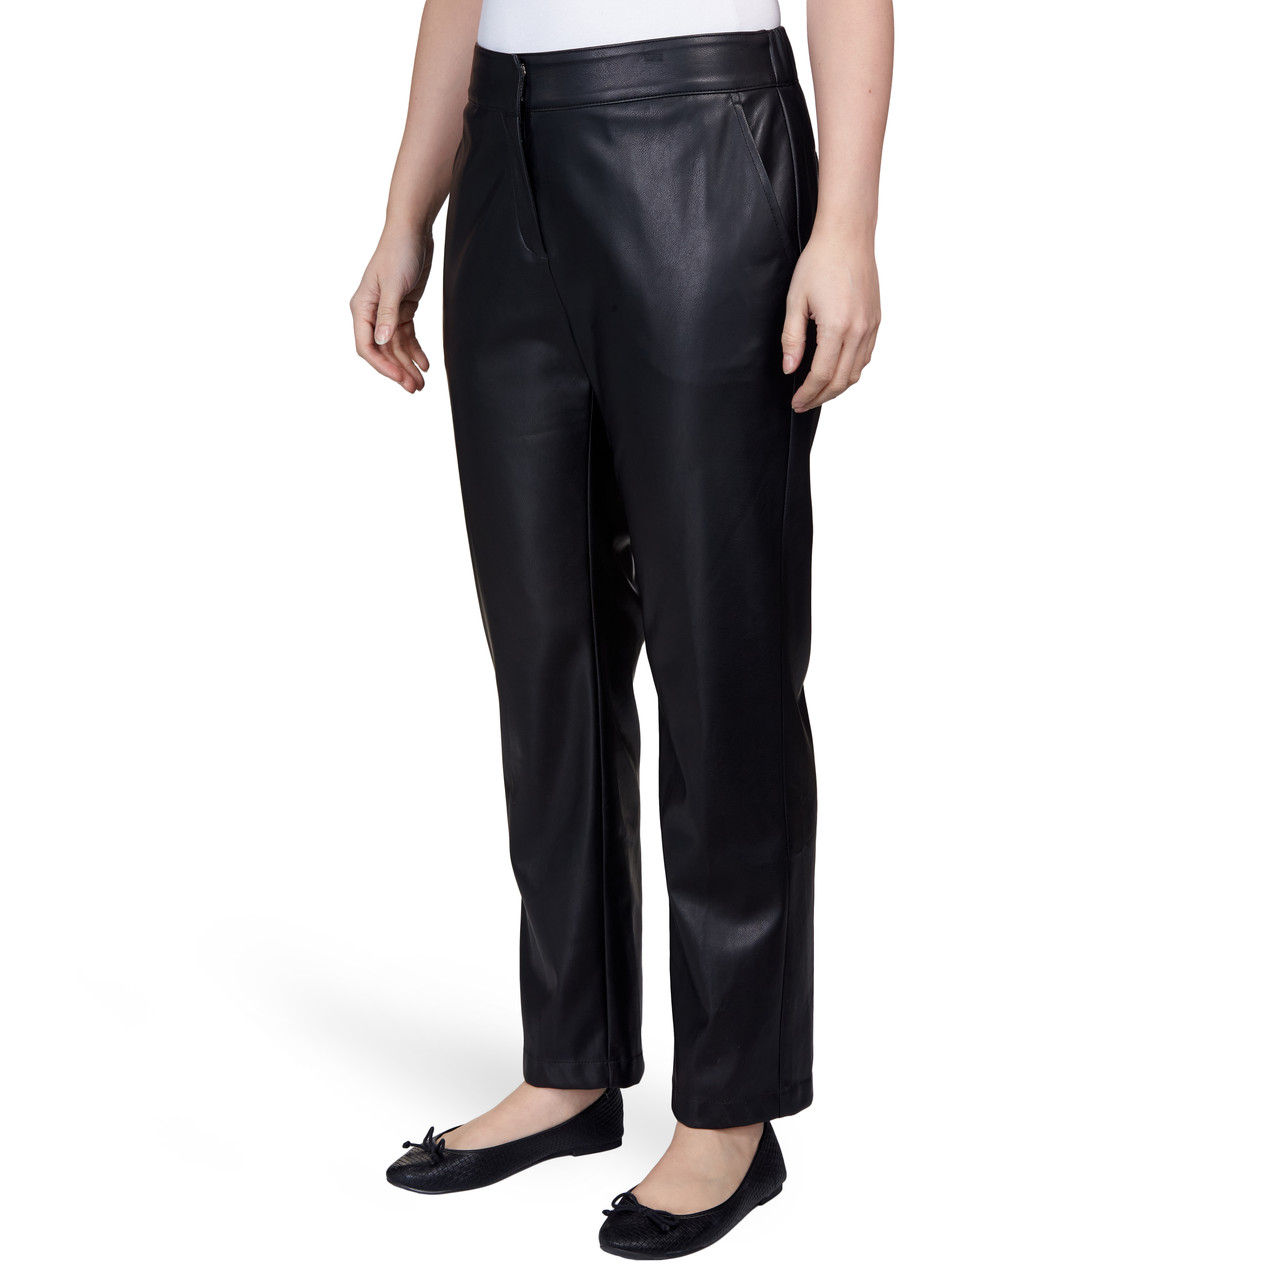 Petite Women's Faux Leather Pull On Pant